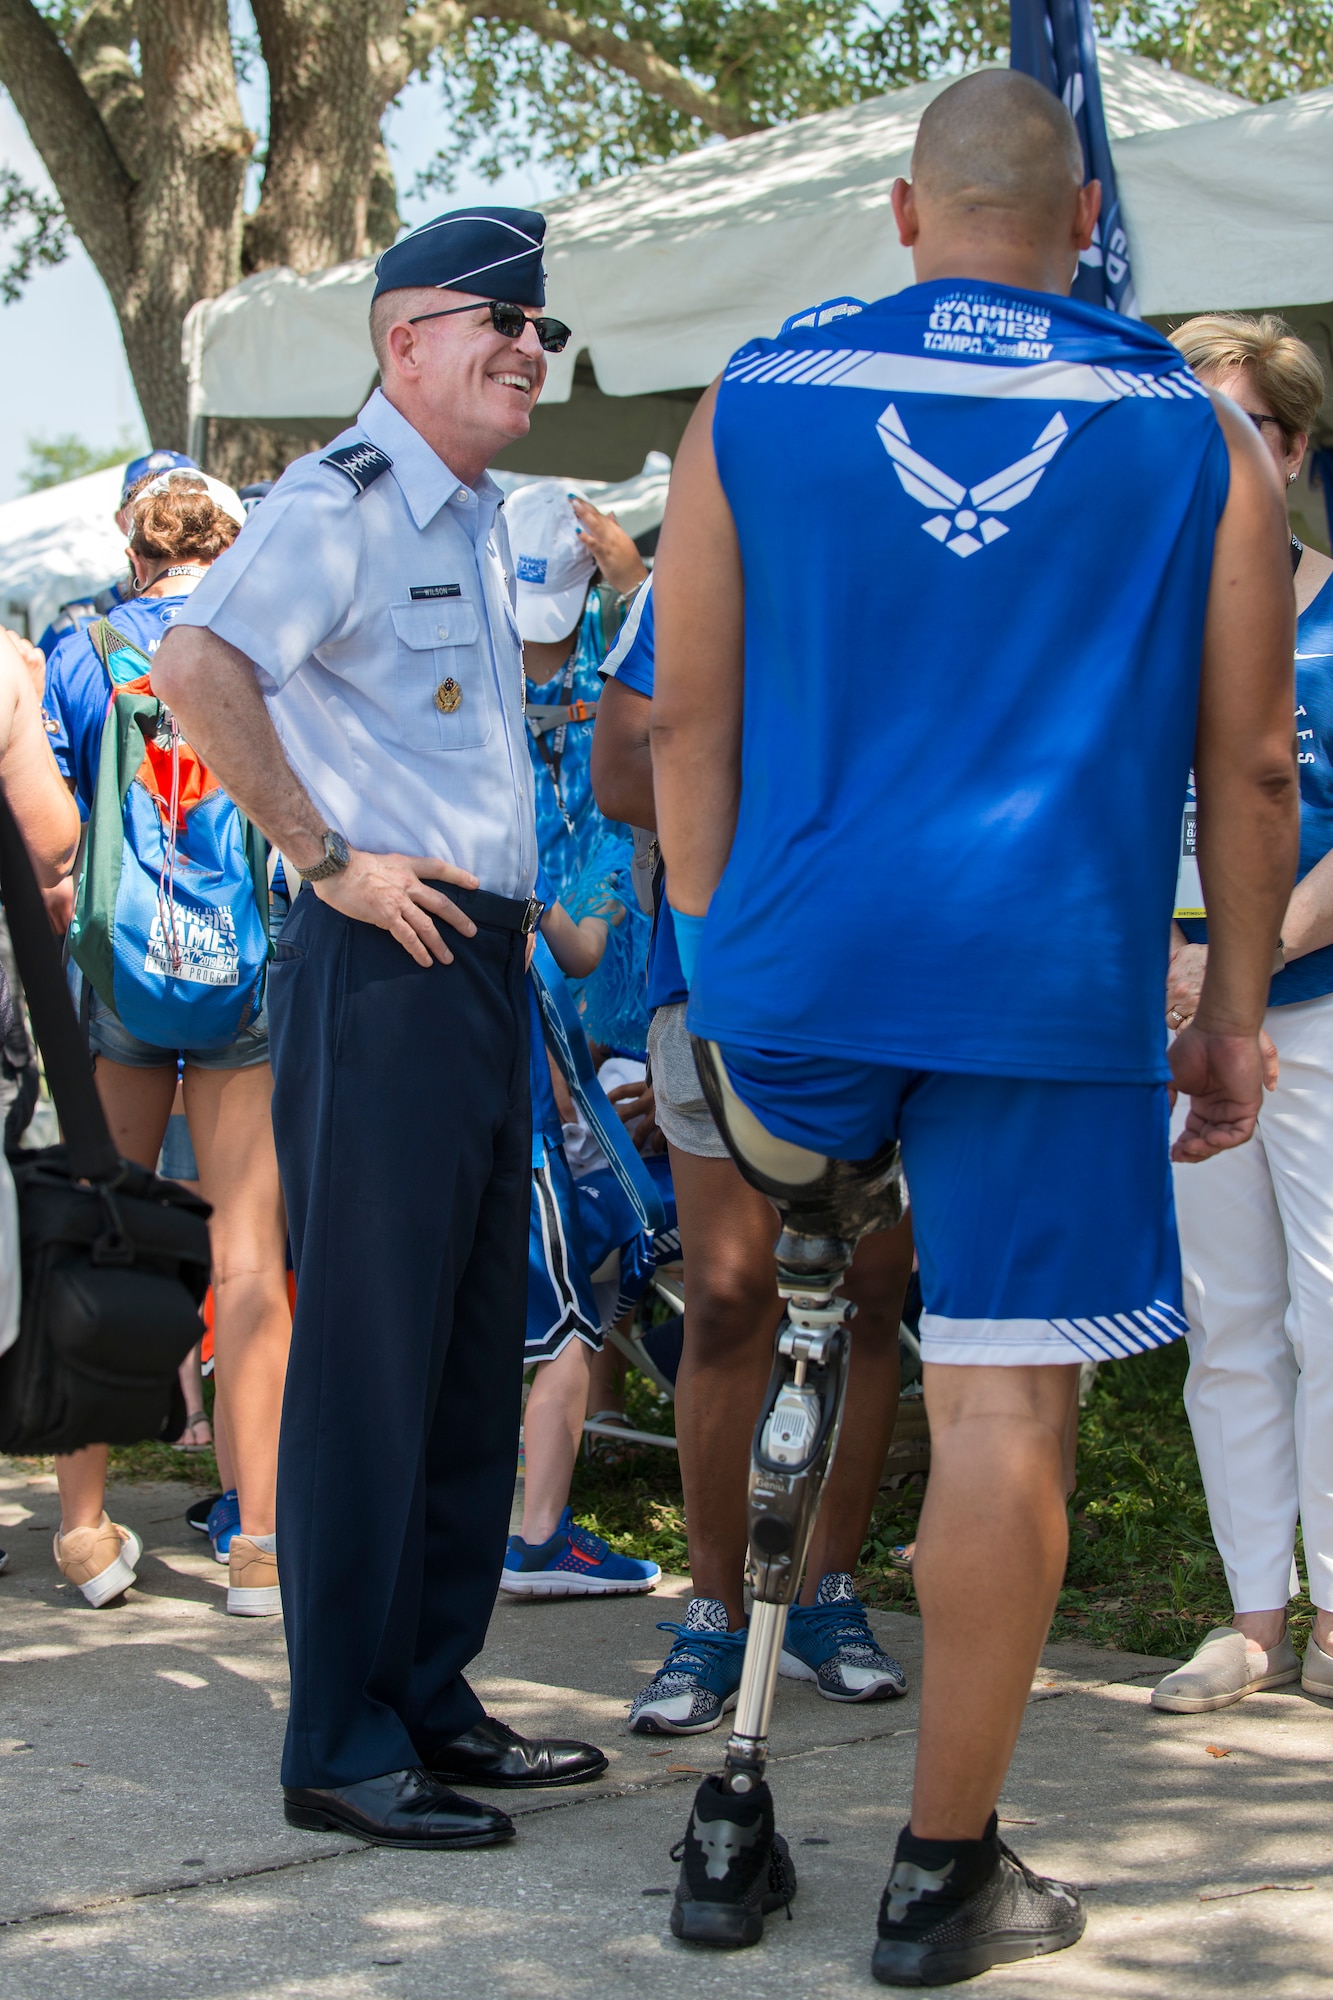 U.S. Air Force Gen. Stephen W. Wilson, Vice Chief of Staff of the Air Force, speaks with Senior Master Sgt. Brian Williams, a wounded warrior athlete, at the University of South Florida, Tampa, Fla., June 23, 2019.